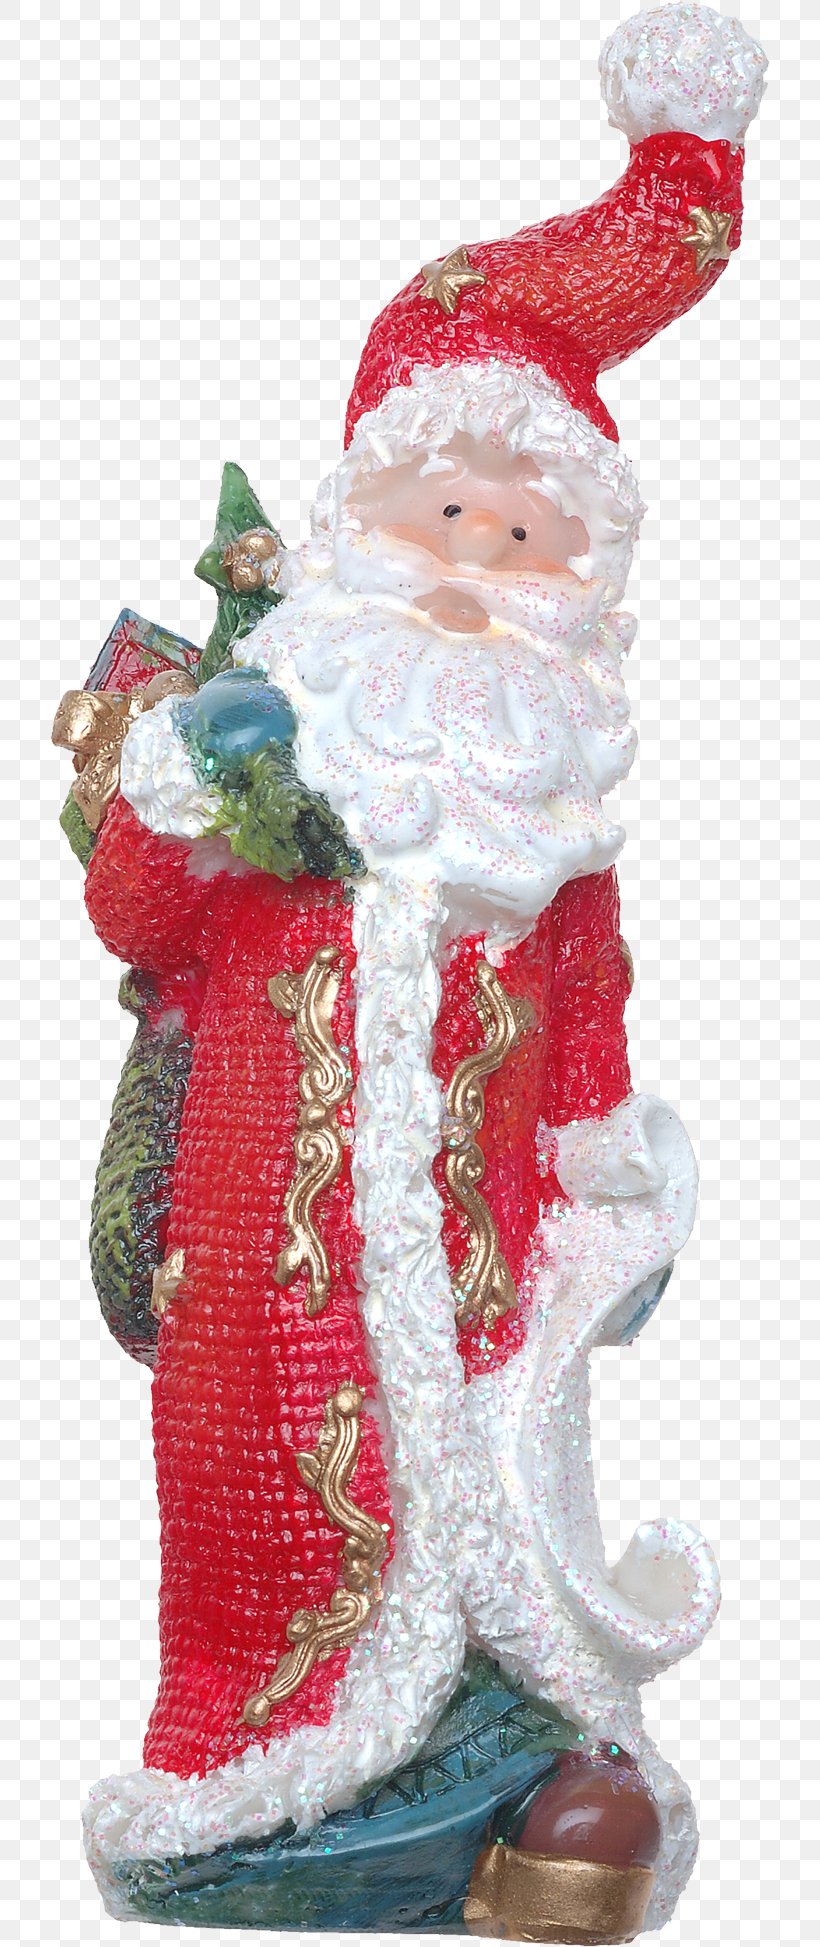 Ded Moroz Santa Claus Snegurochka Christmas Ornament Grandfather, PNG, 720x1947px, Ded Moroz, Character, Christmas, Christmas Decoration, Christmas Ornament Download Free